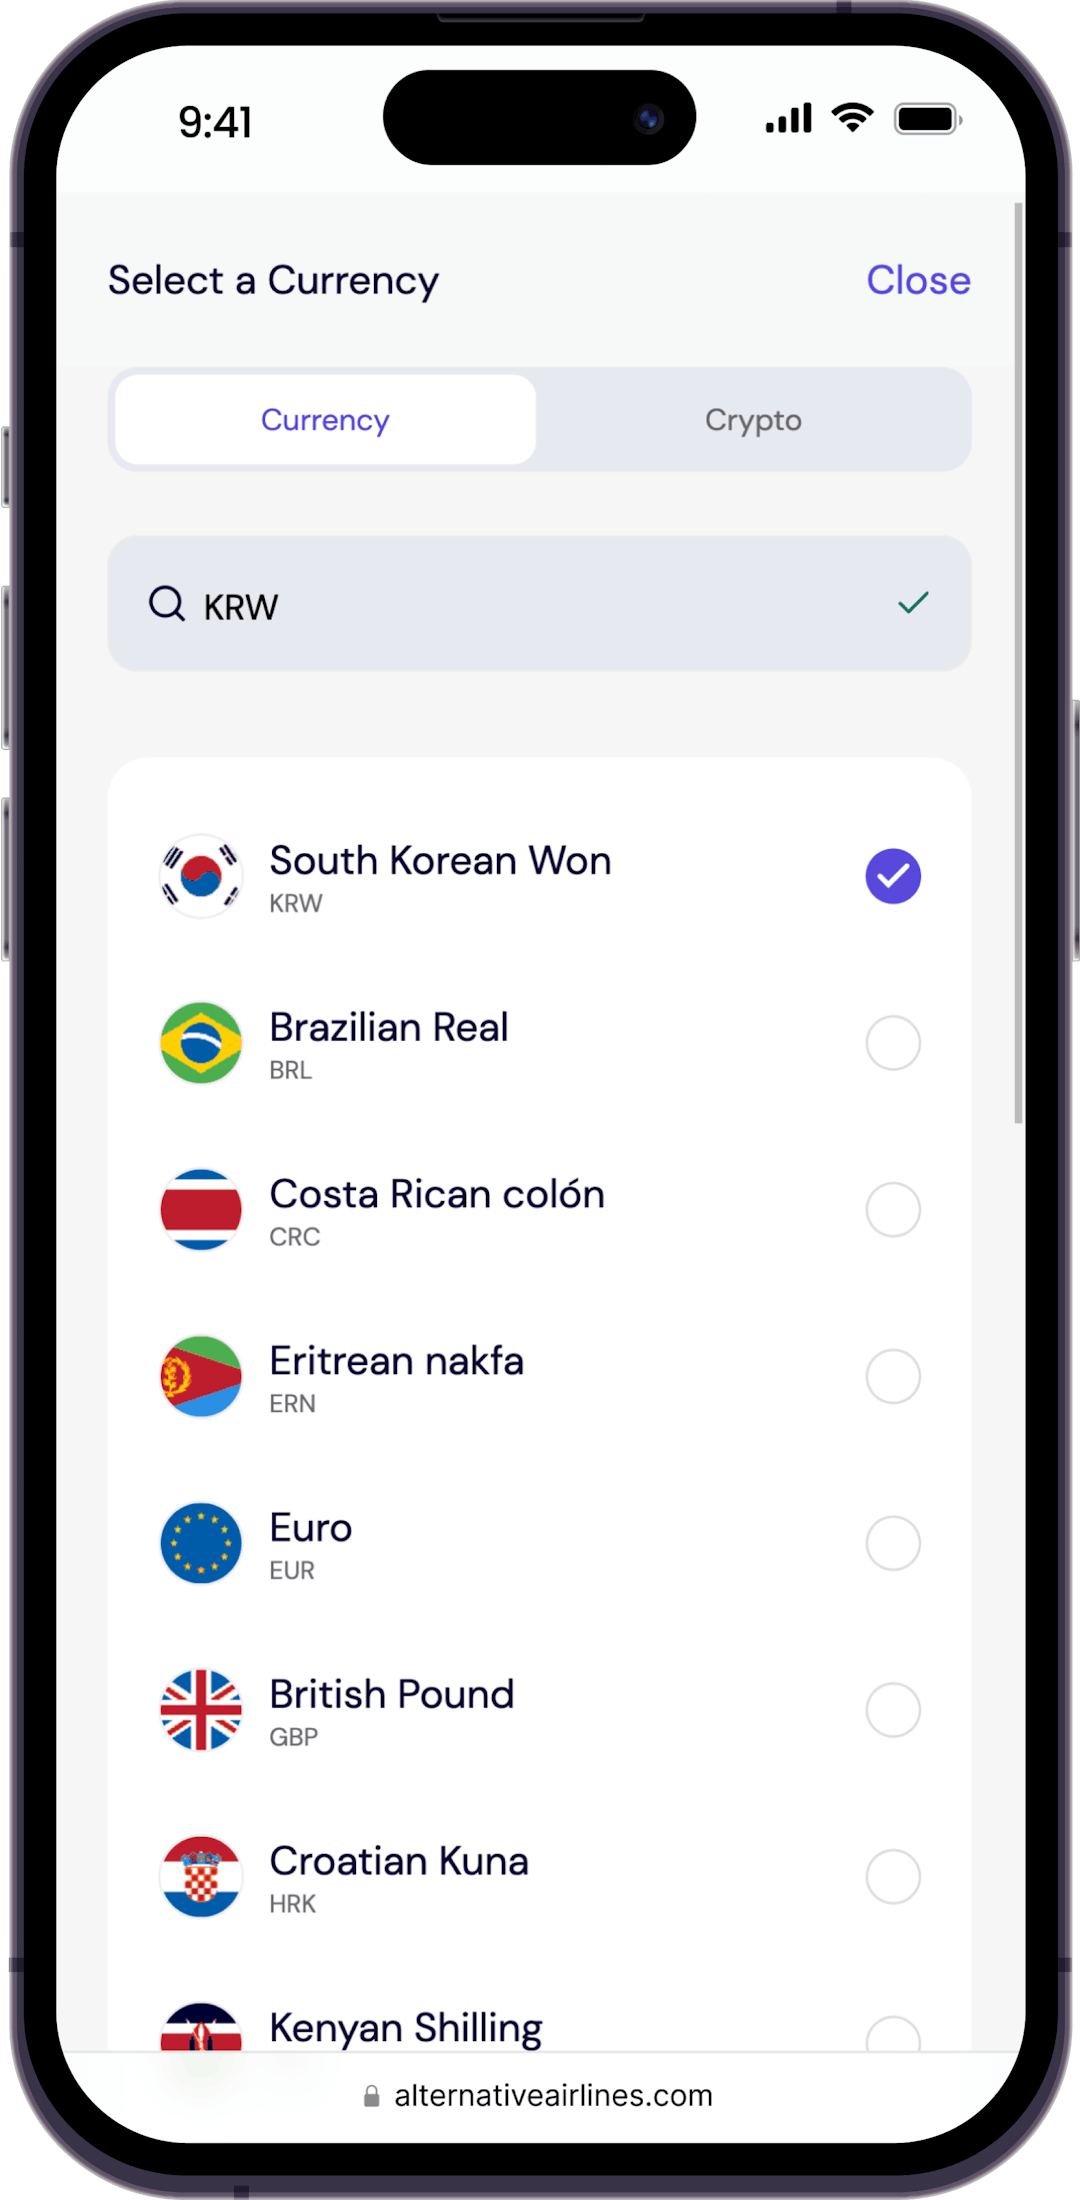 Step 3 - type 'KRW' to search for flights in Korean Won